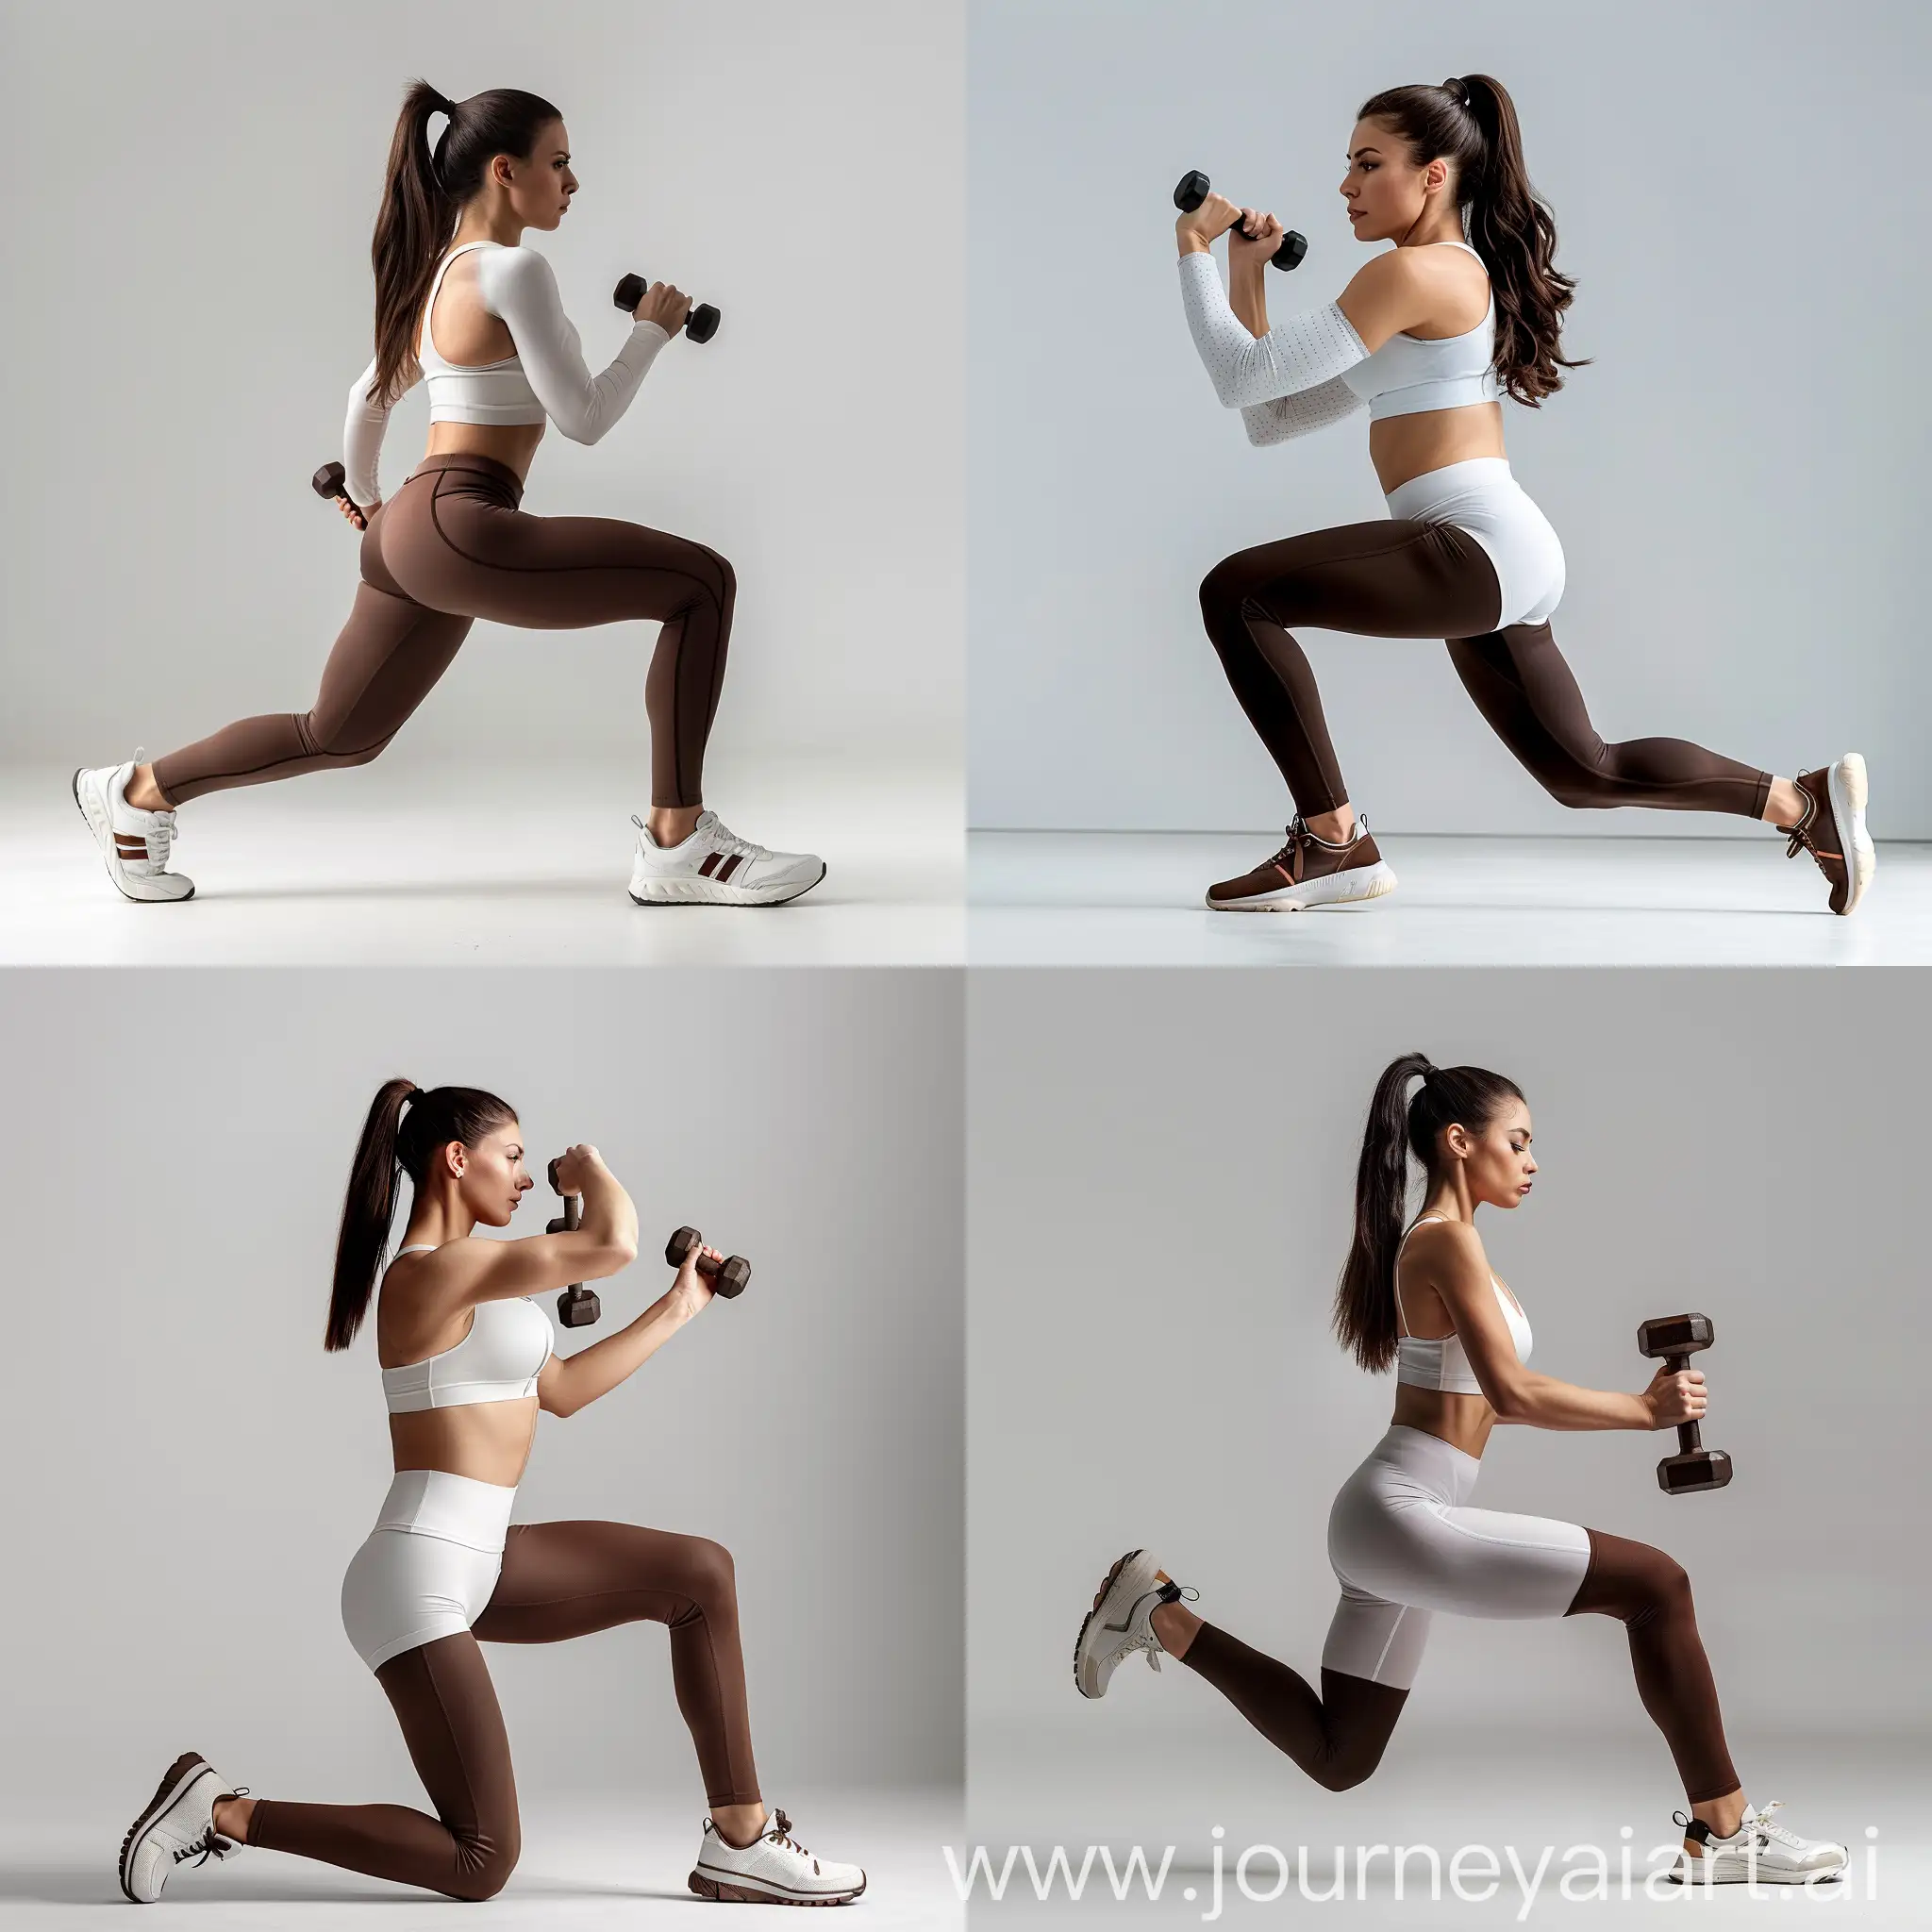 Woman with dark hair in a ponytail performs a lunge exercise holding dumbbells, wearing a white sports bra, white leggings, and white shoes. The background is a plain light grey studio scene.
arafed woman in dark brown tights and dark brown sneakers doing squats with a dumbble, fit woman, strong legs, fit girl, fit curvy physique, perfect dynamic body form, toned legs, side view of her taking steps, long shot from back, fit body, lower body, legs and arms, dynamic active running pose, fitness model, toned body 8k HD